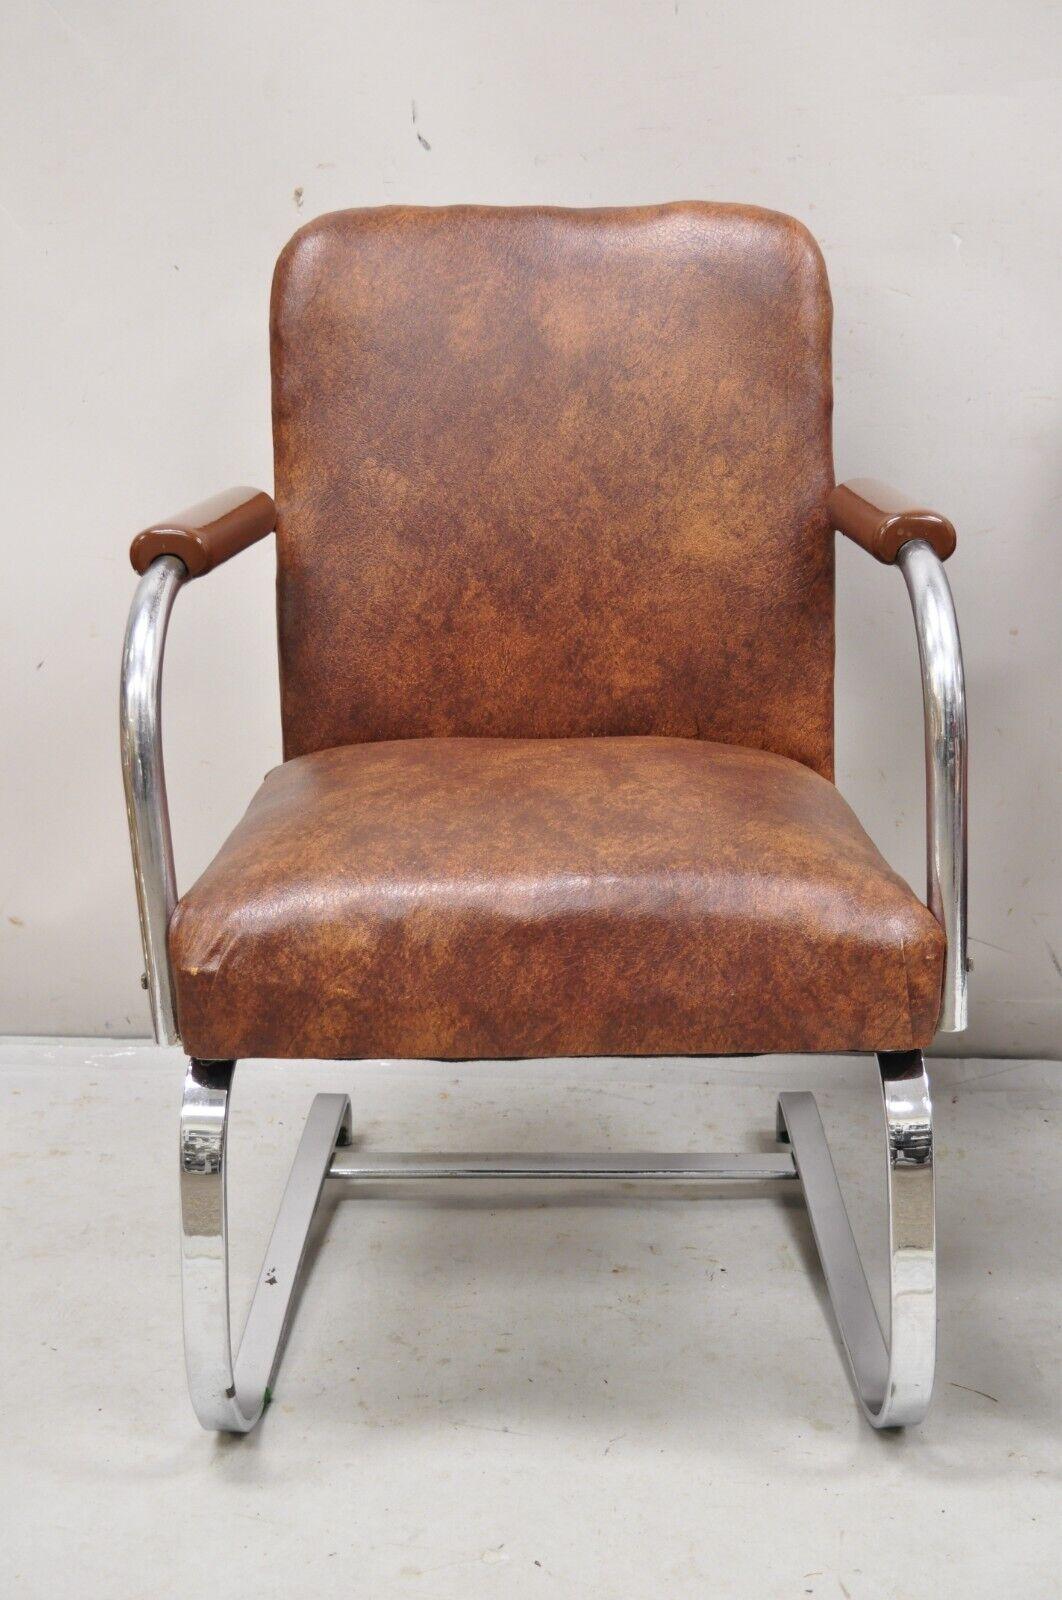 Vintage Lloyd Mfg Kem Weber Art Deco Steel Cantilever Lounge Chairs - a Pair In Good Condition For Sale In Philadelphia, PA